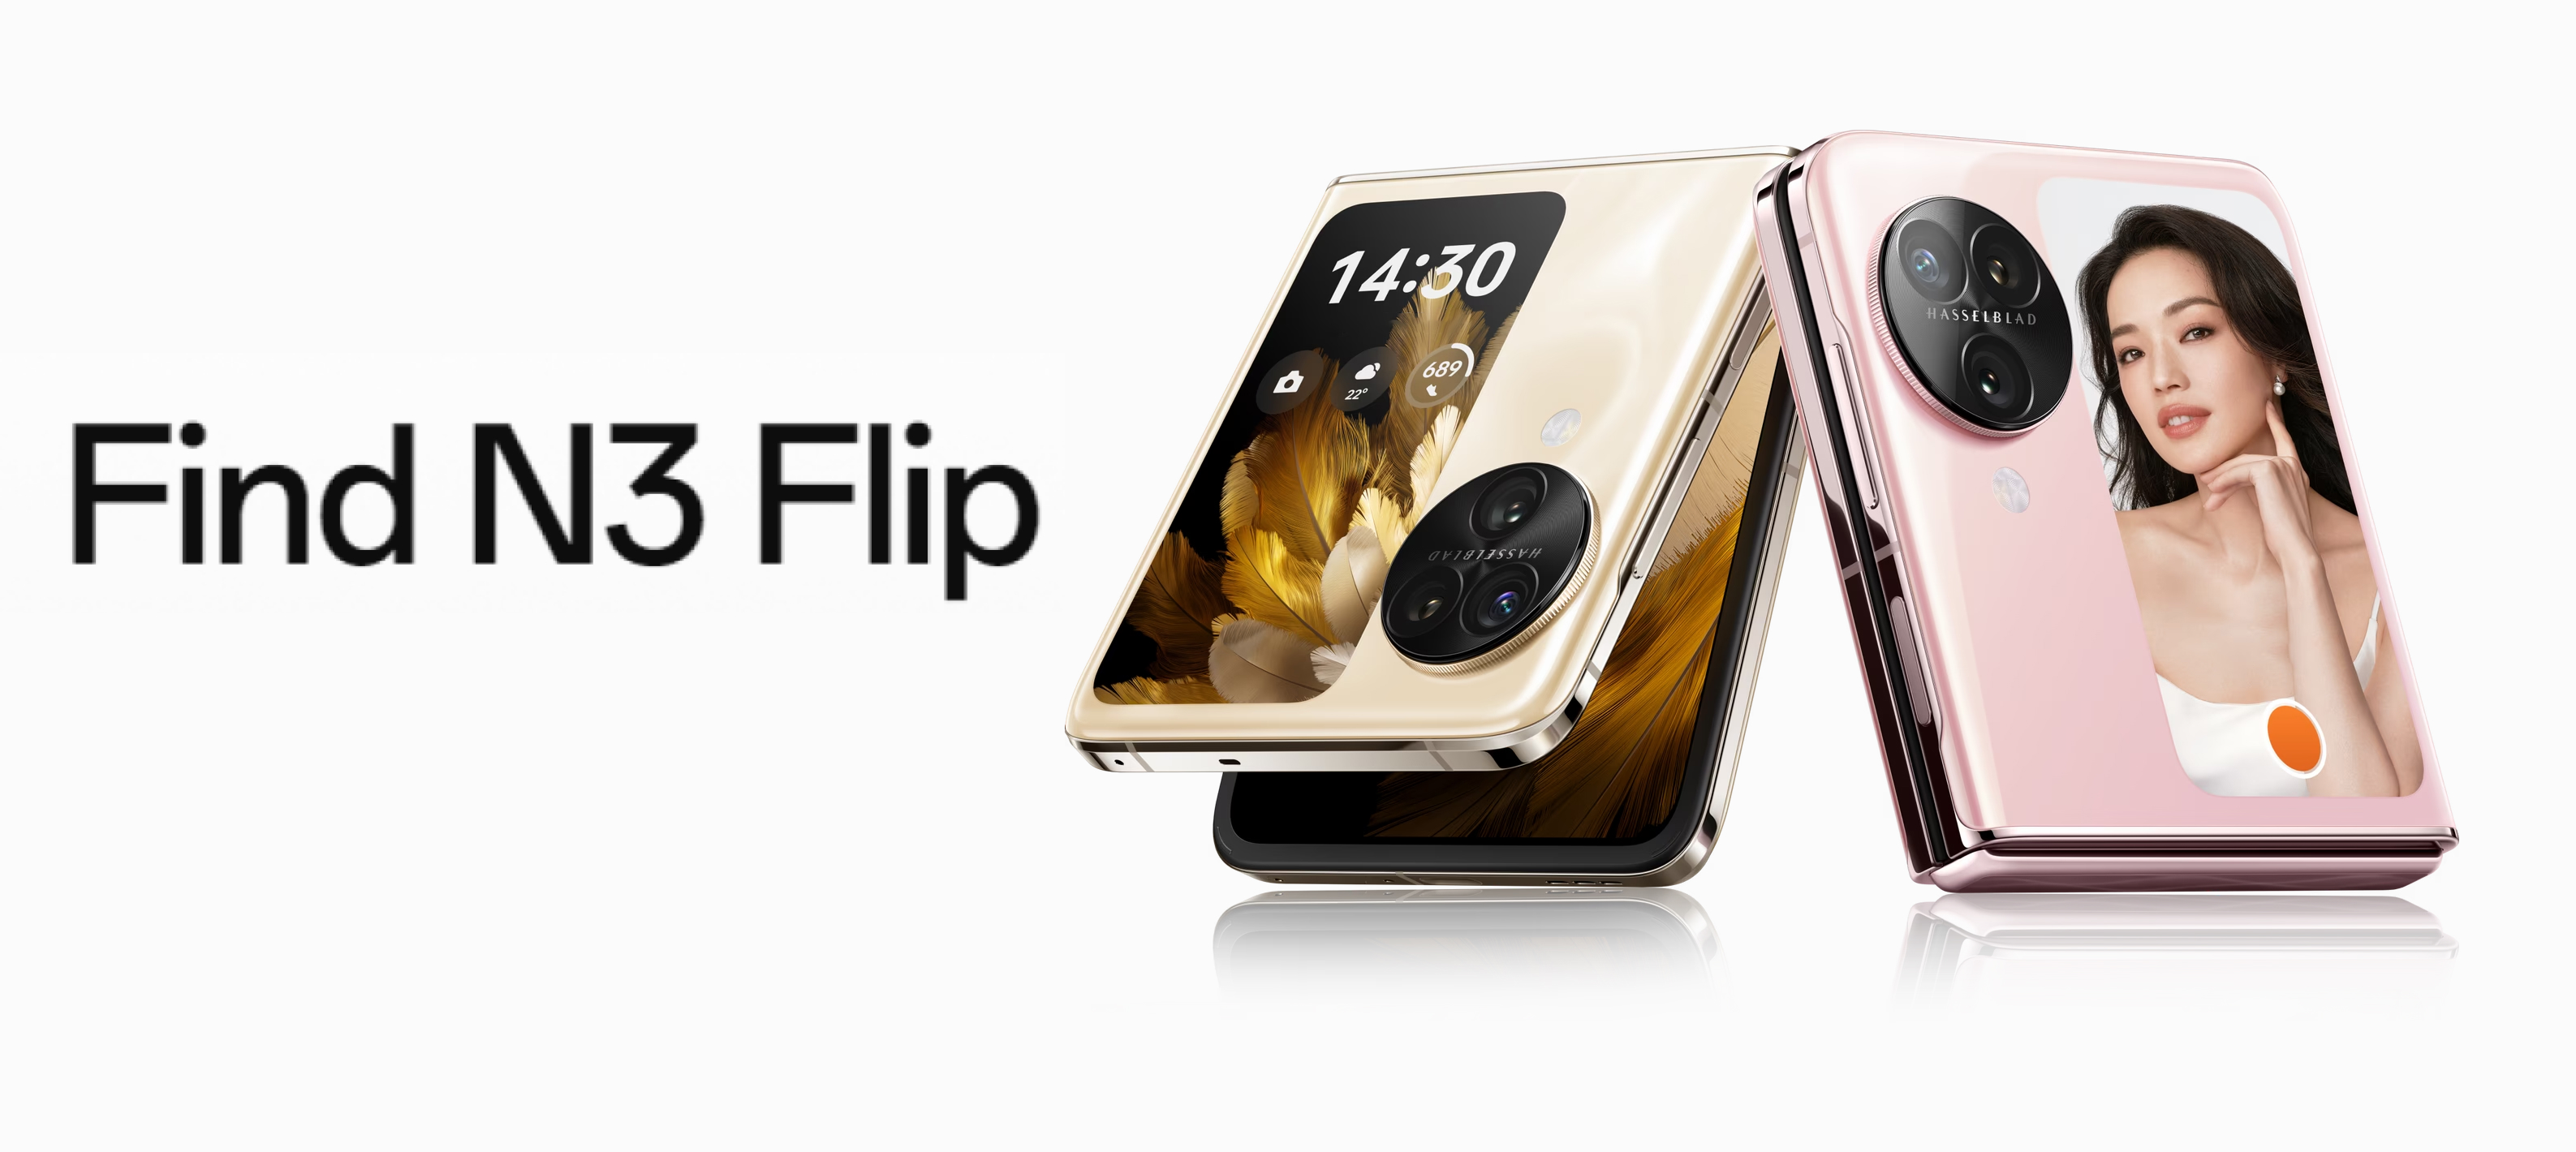 OPPO Find N3 Flip: Exciting foldable smartphone with a triple camera setup